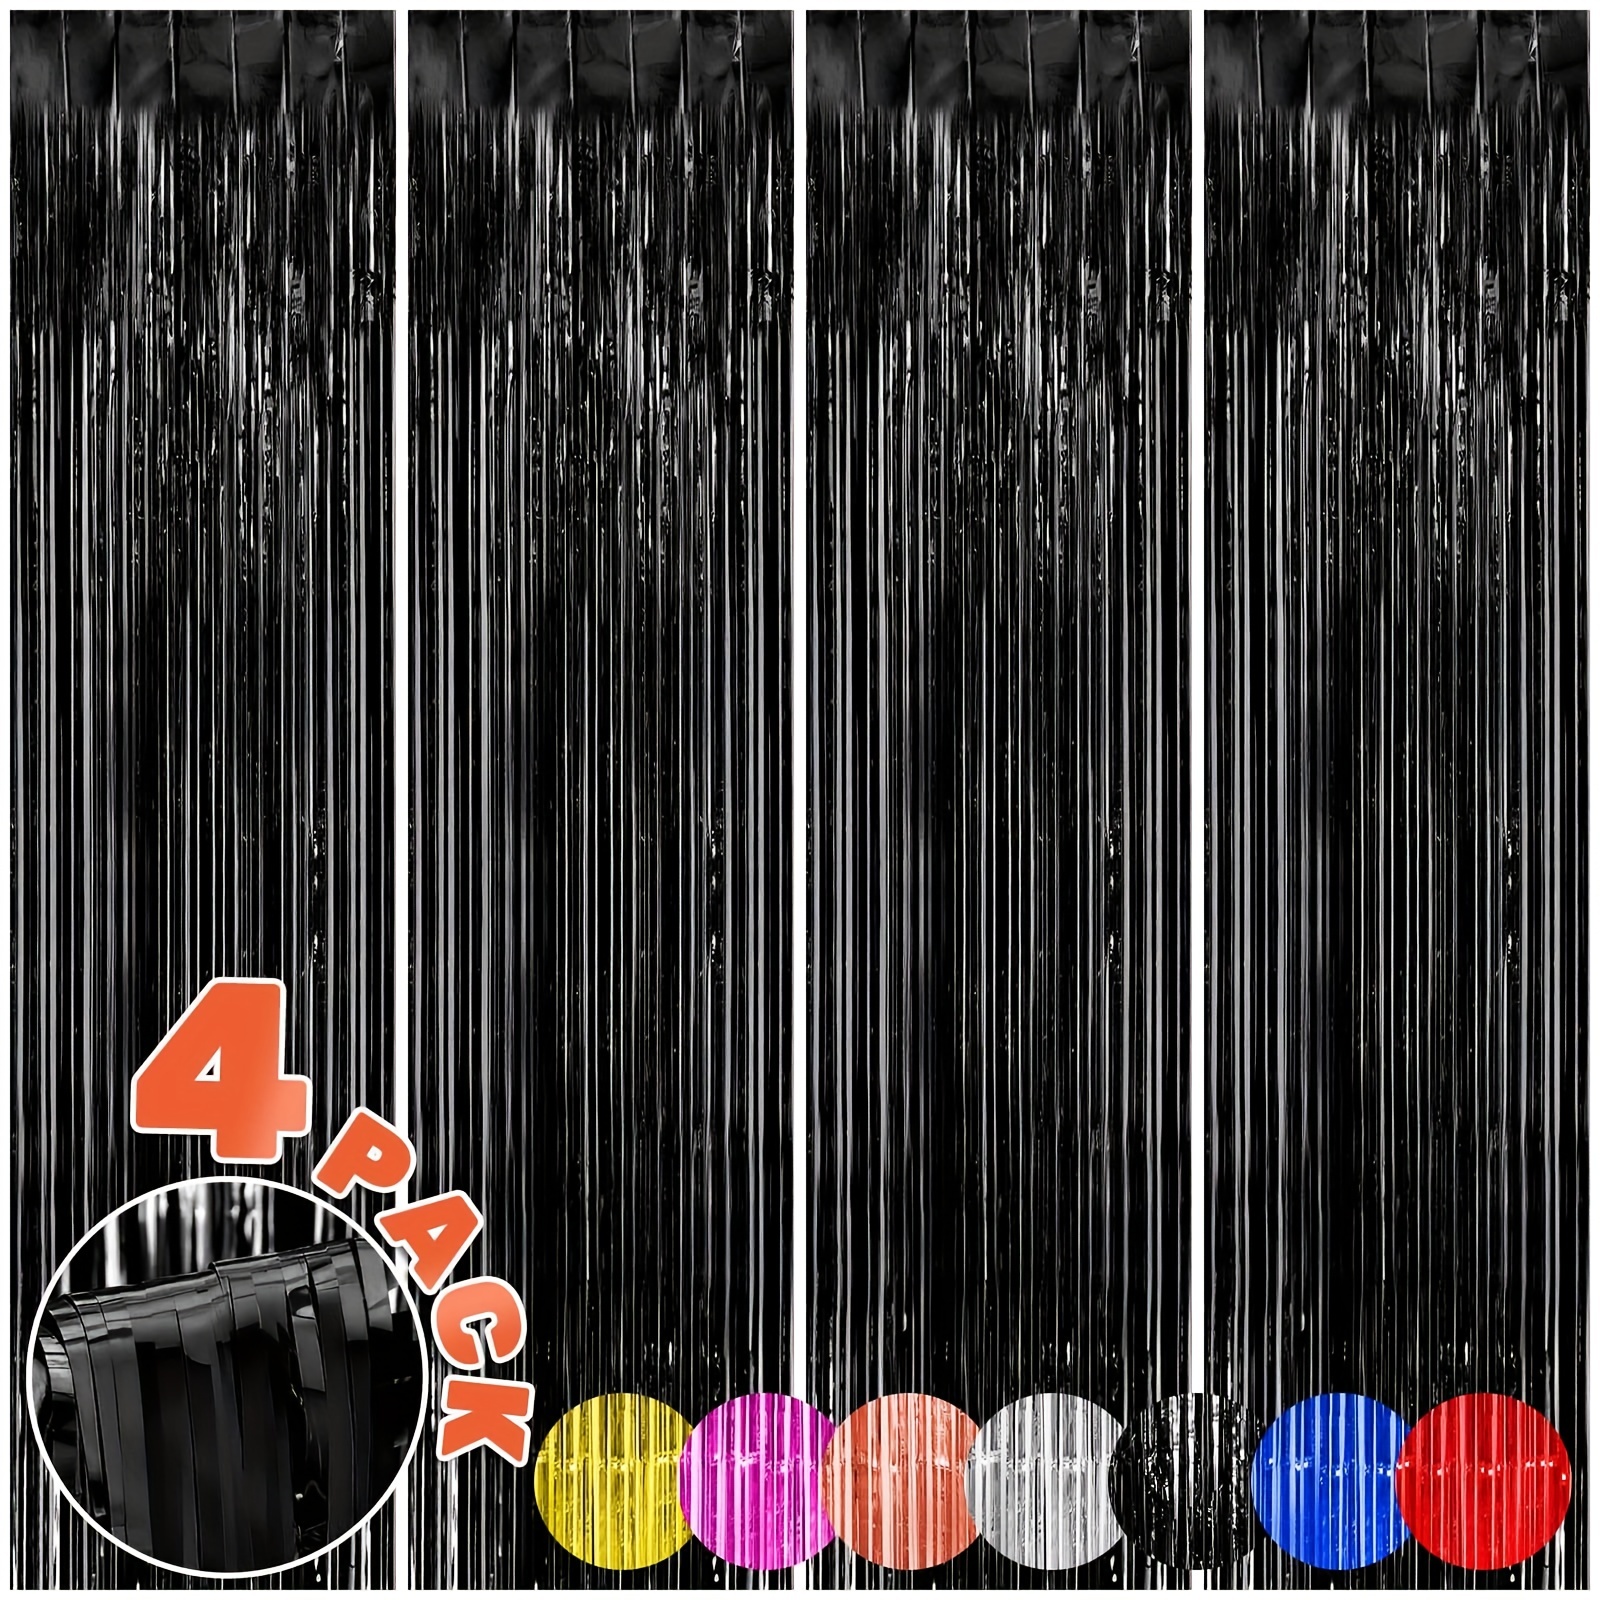 Black and Gold Foil Fringe Curtain,Tinsel Metallic Curtains Photo Backdrop  Streamer Curtain for New Year Birthday Party Supplies